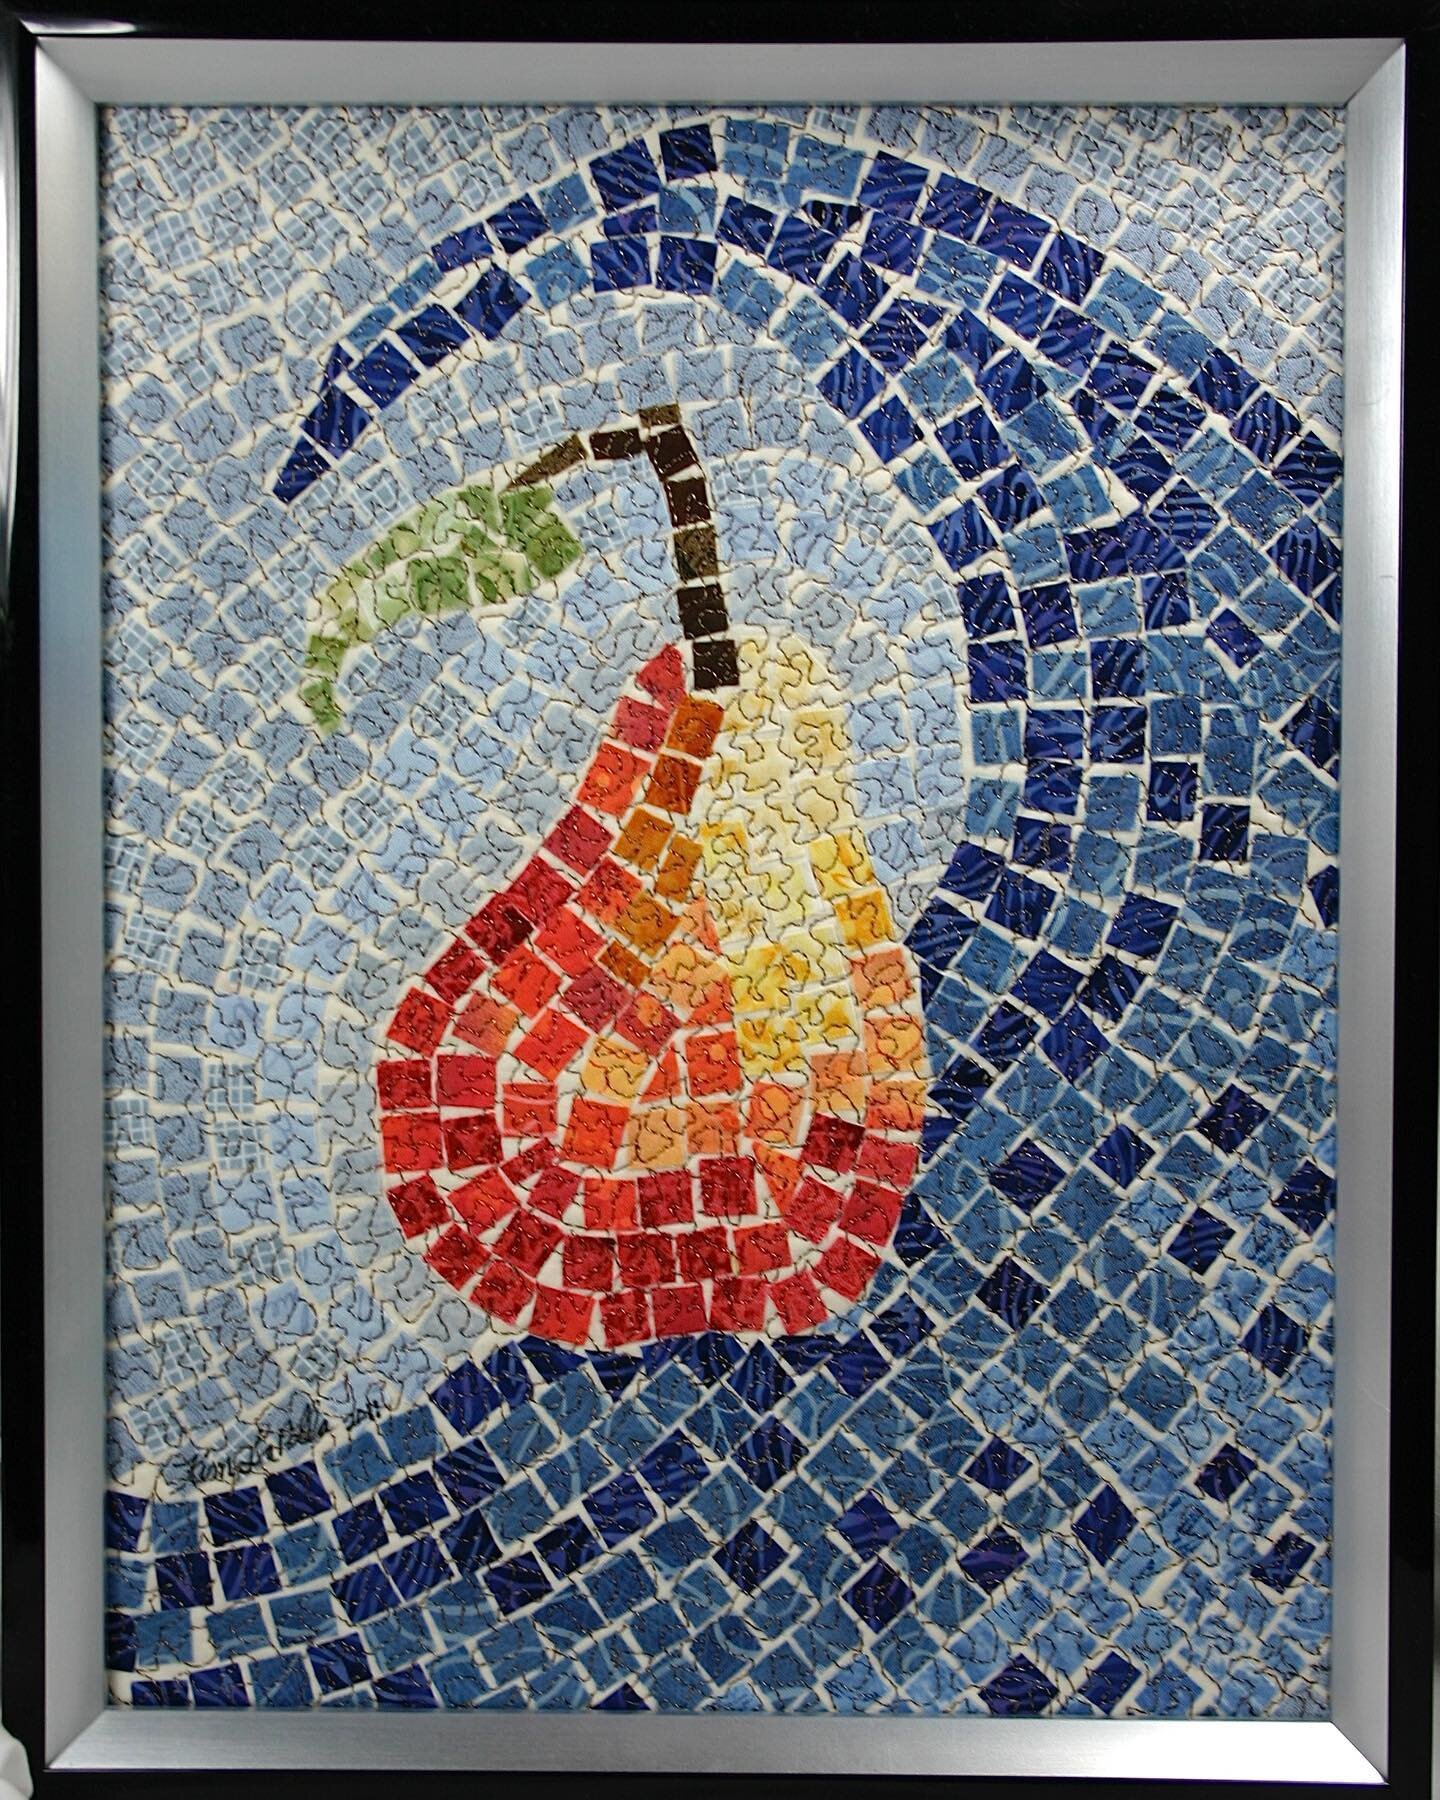 Fun with fabric mosaics. I played around with pears for this series, completed in 2011.
#mosaicart #fiberart #artquilts